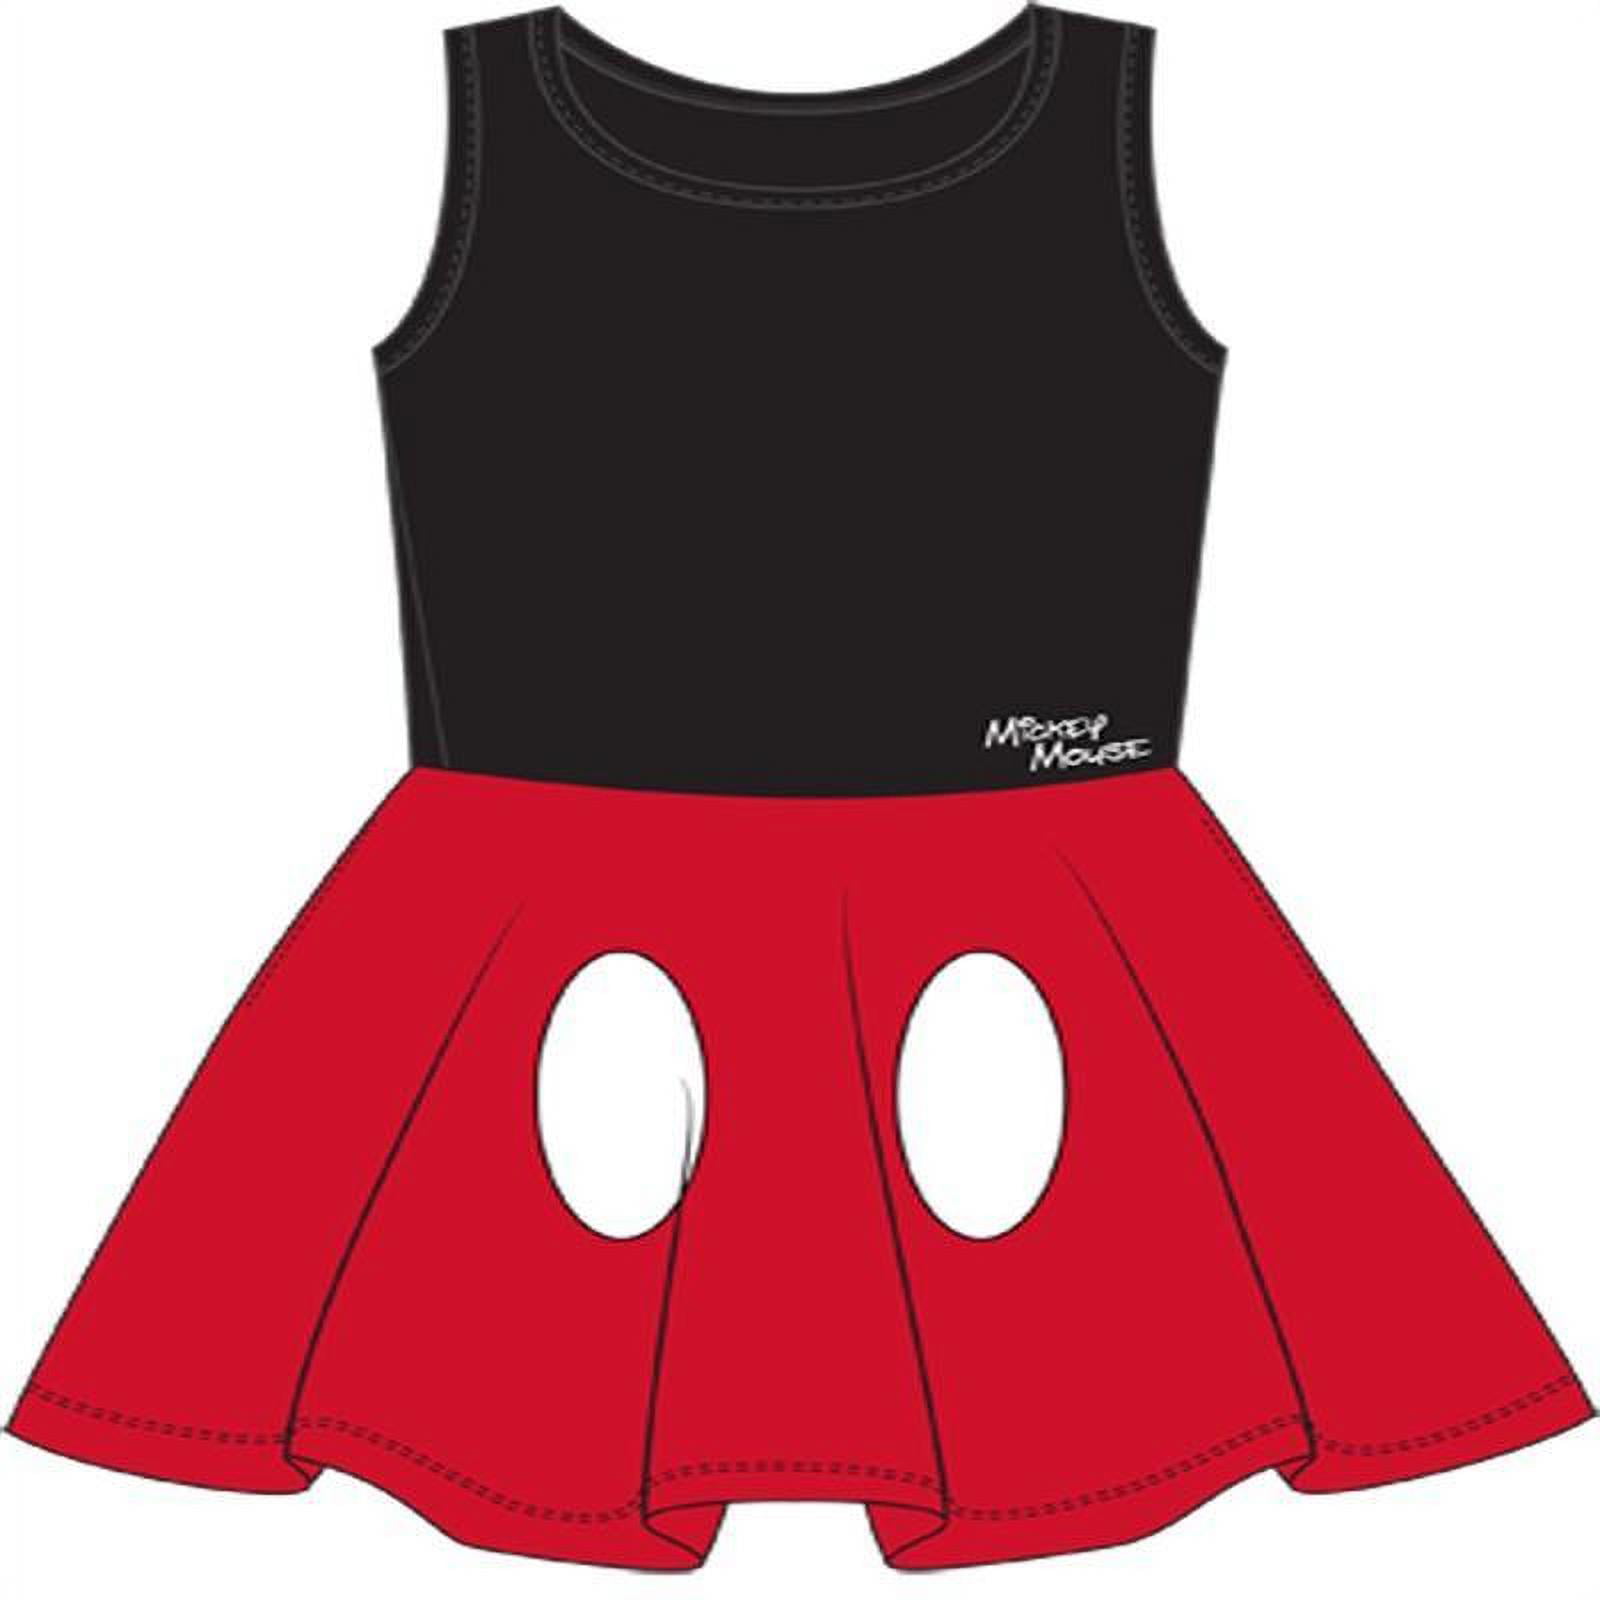 MinnieMouse Disney red Dress with Polka dot and Flowers Its All About Minnie Hooded Poncho Girls Towel